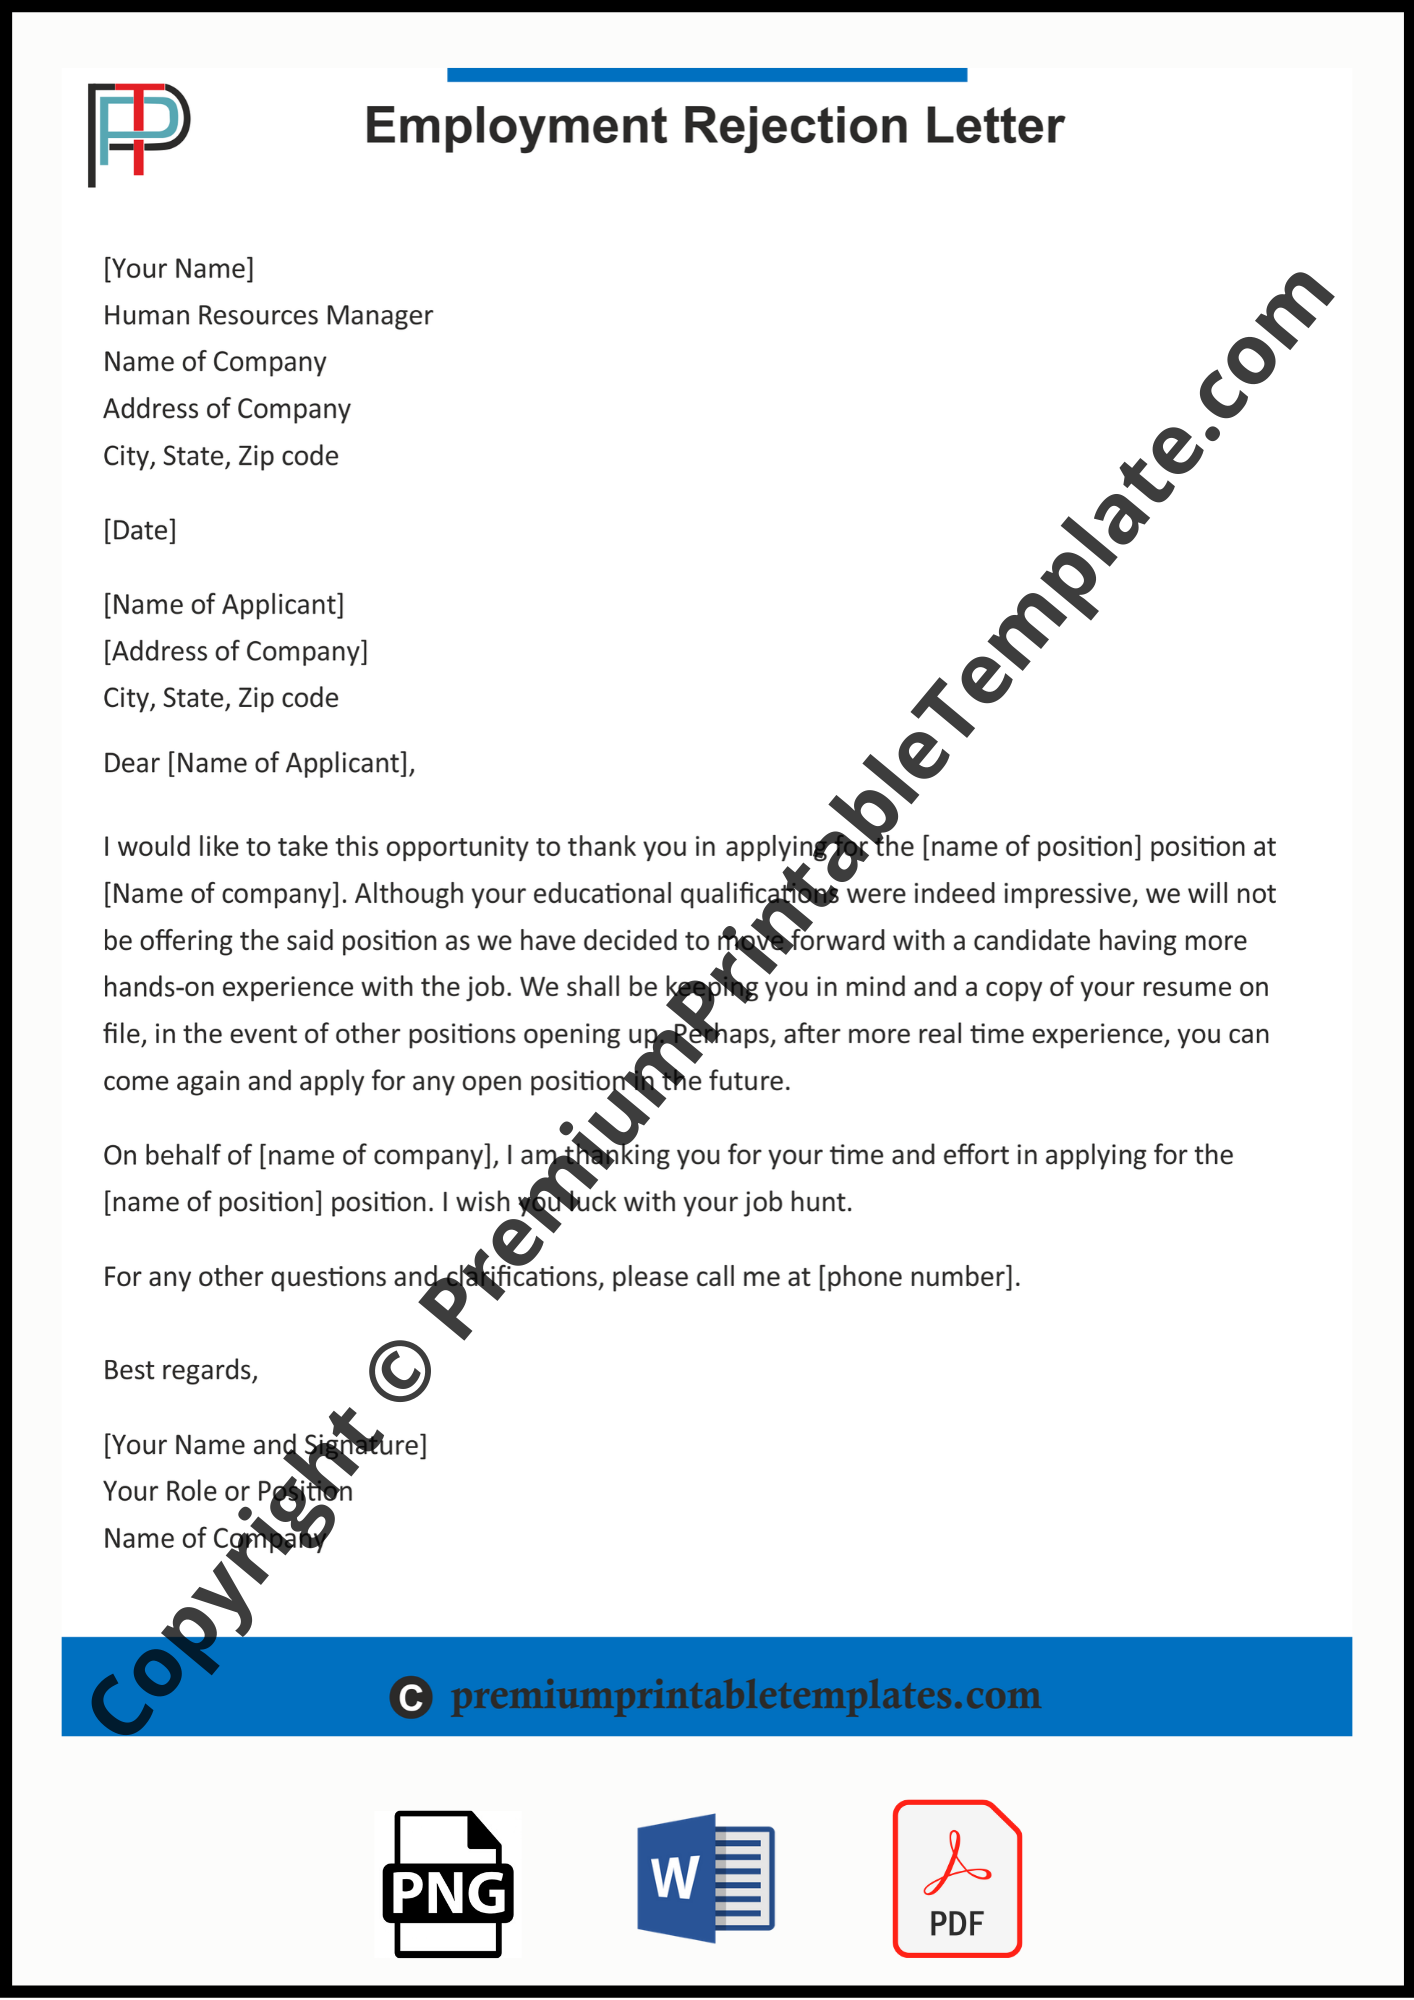 Human Resources Rejection Letter from premiumprintabletemplates.com